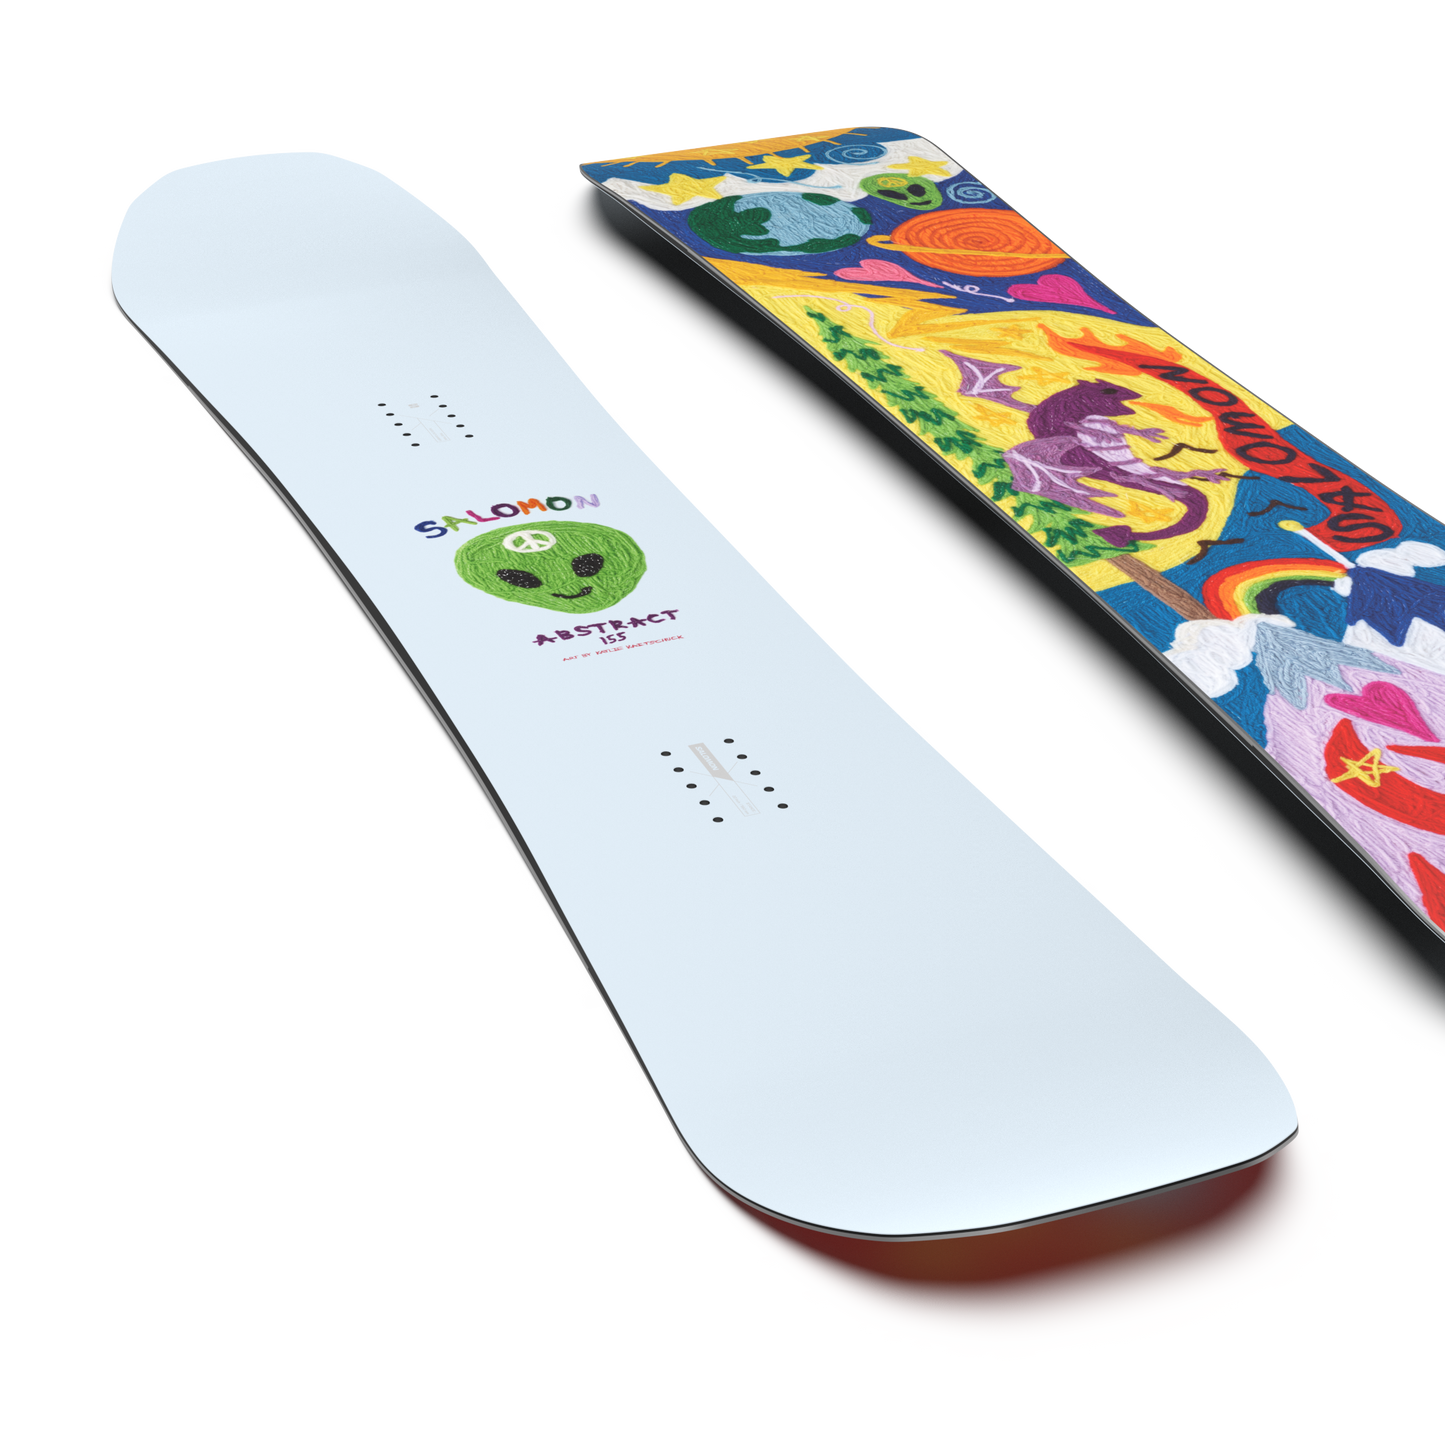 ABSTRACT SNOWBOARD